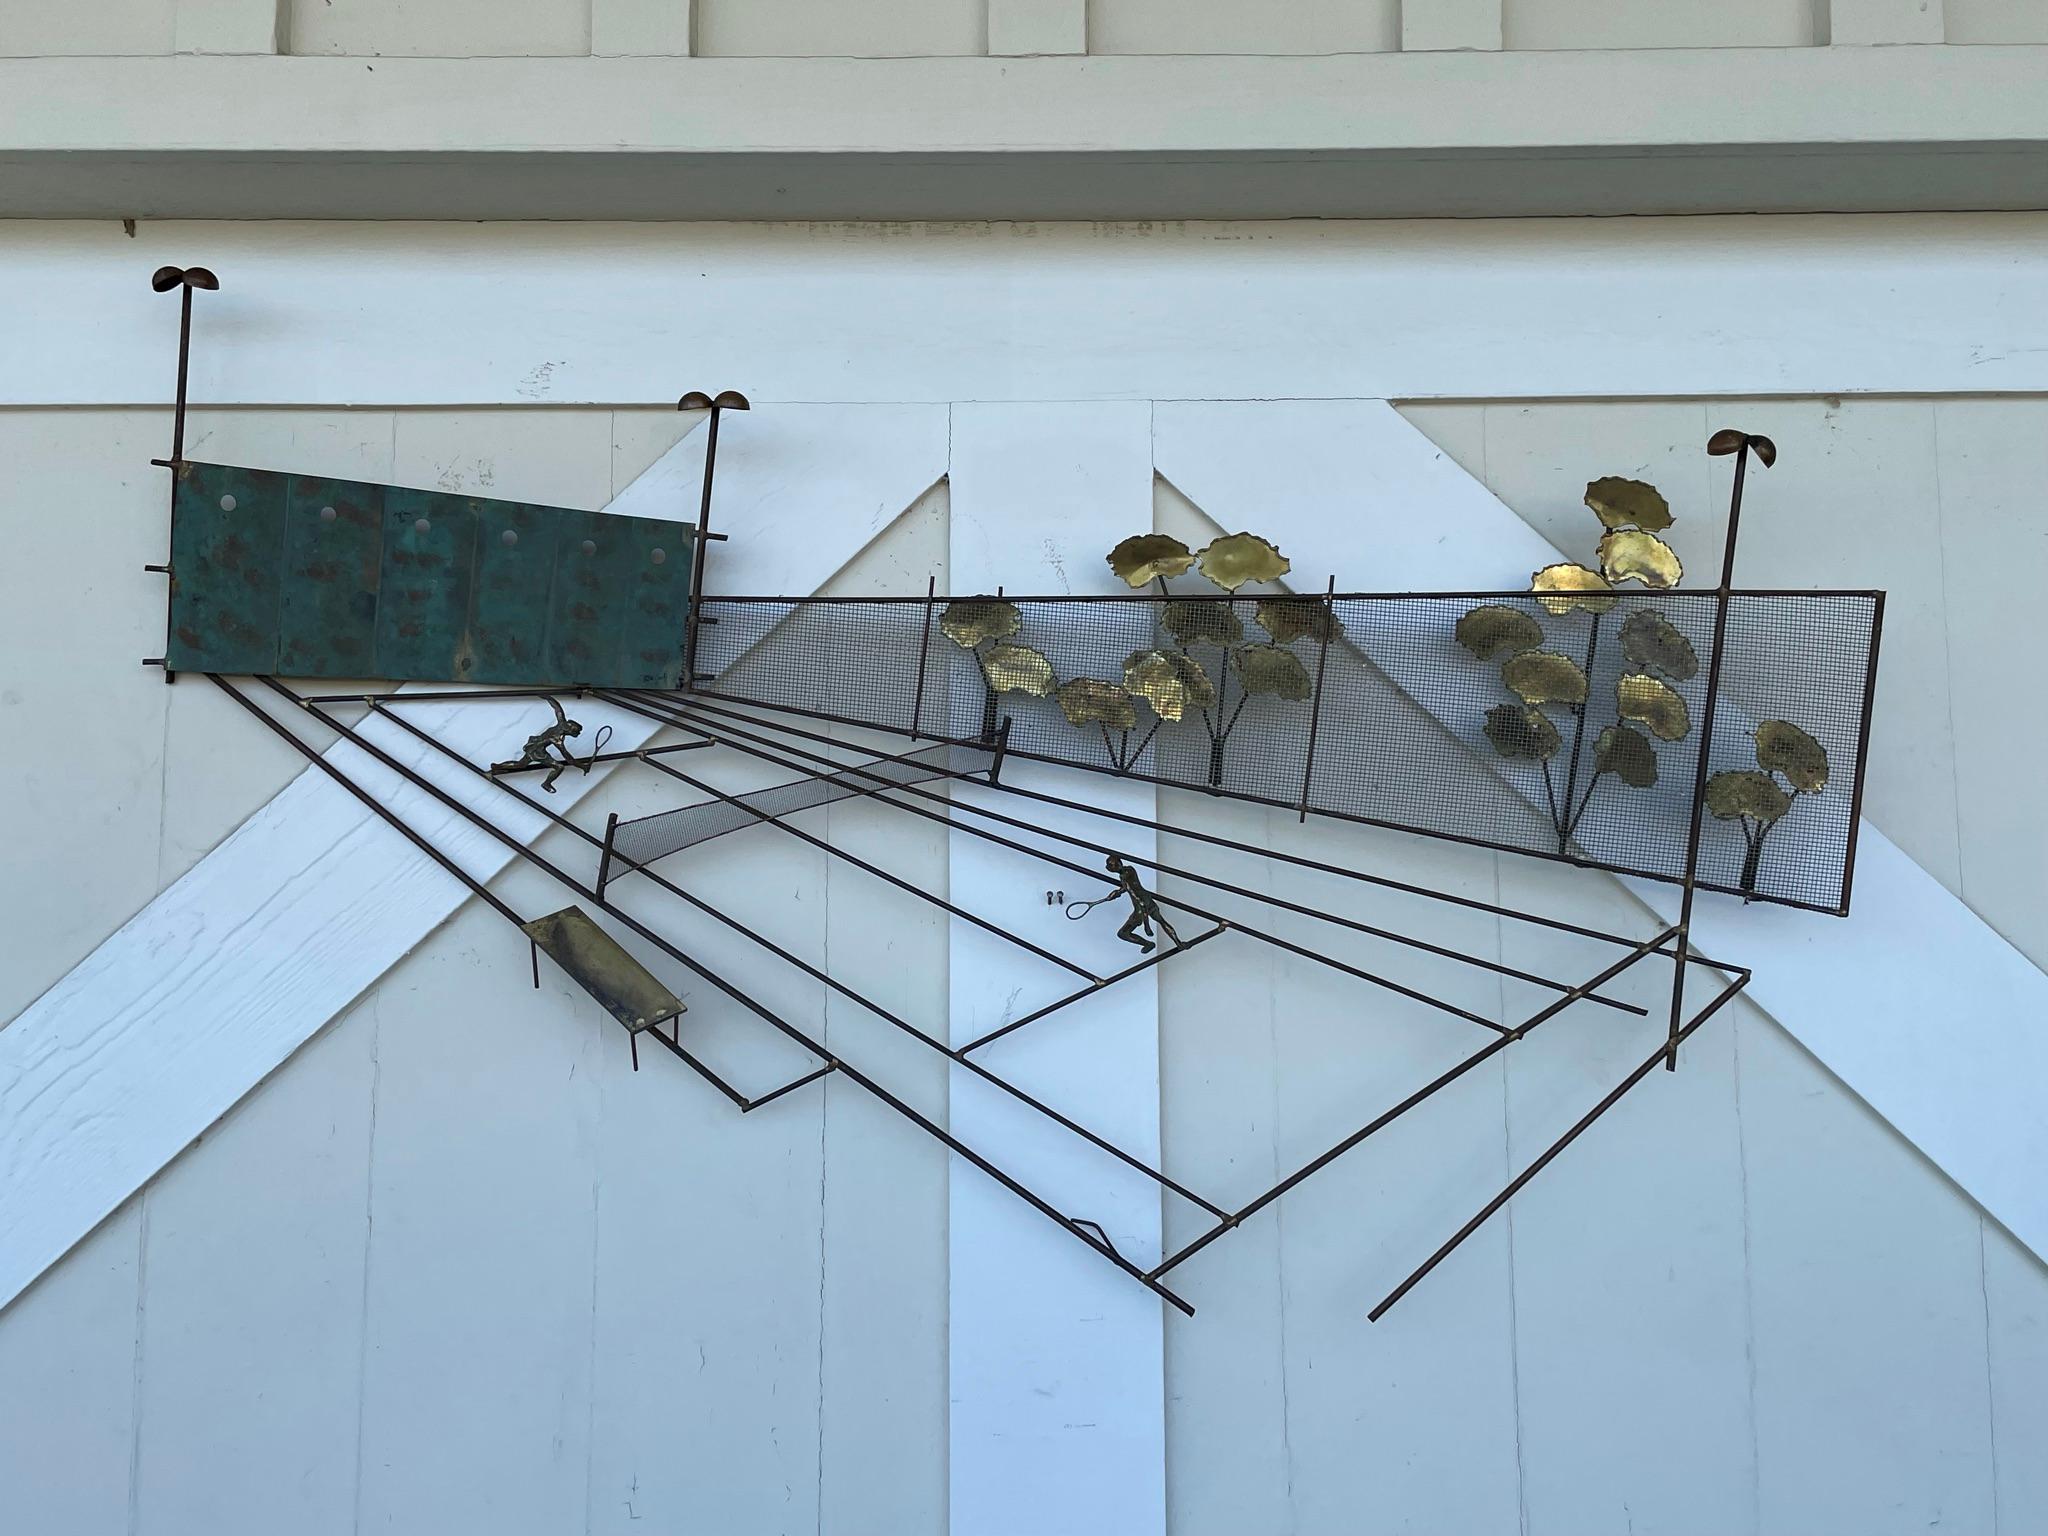 Vintage wall sculpture in brass, bronze and metal designed and manufactured in the 1960s by Cutius Jere.
The piece depicts a full tennis court with 2 players, a bench, lights, fence and trees.
A very realistic piece of art.
The piece is signed by